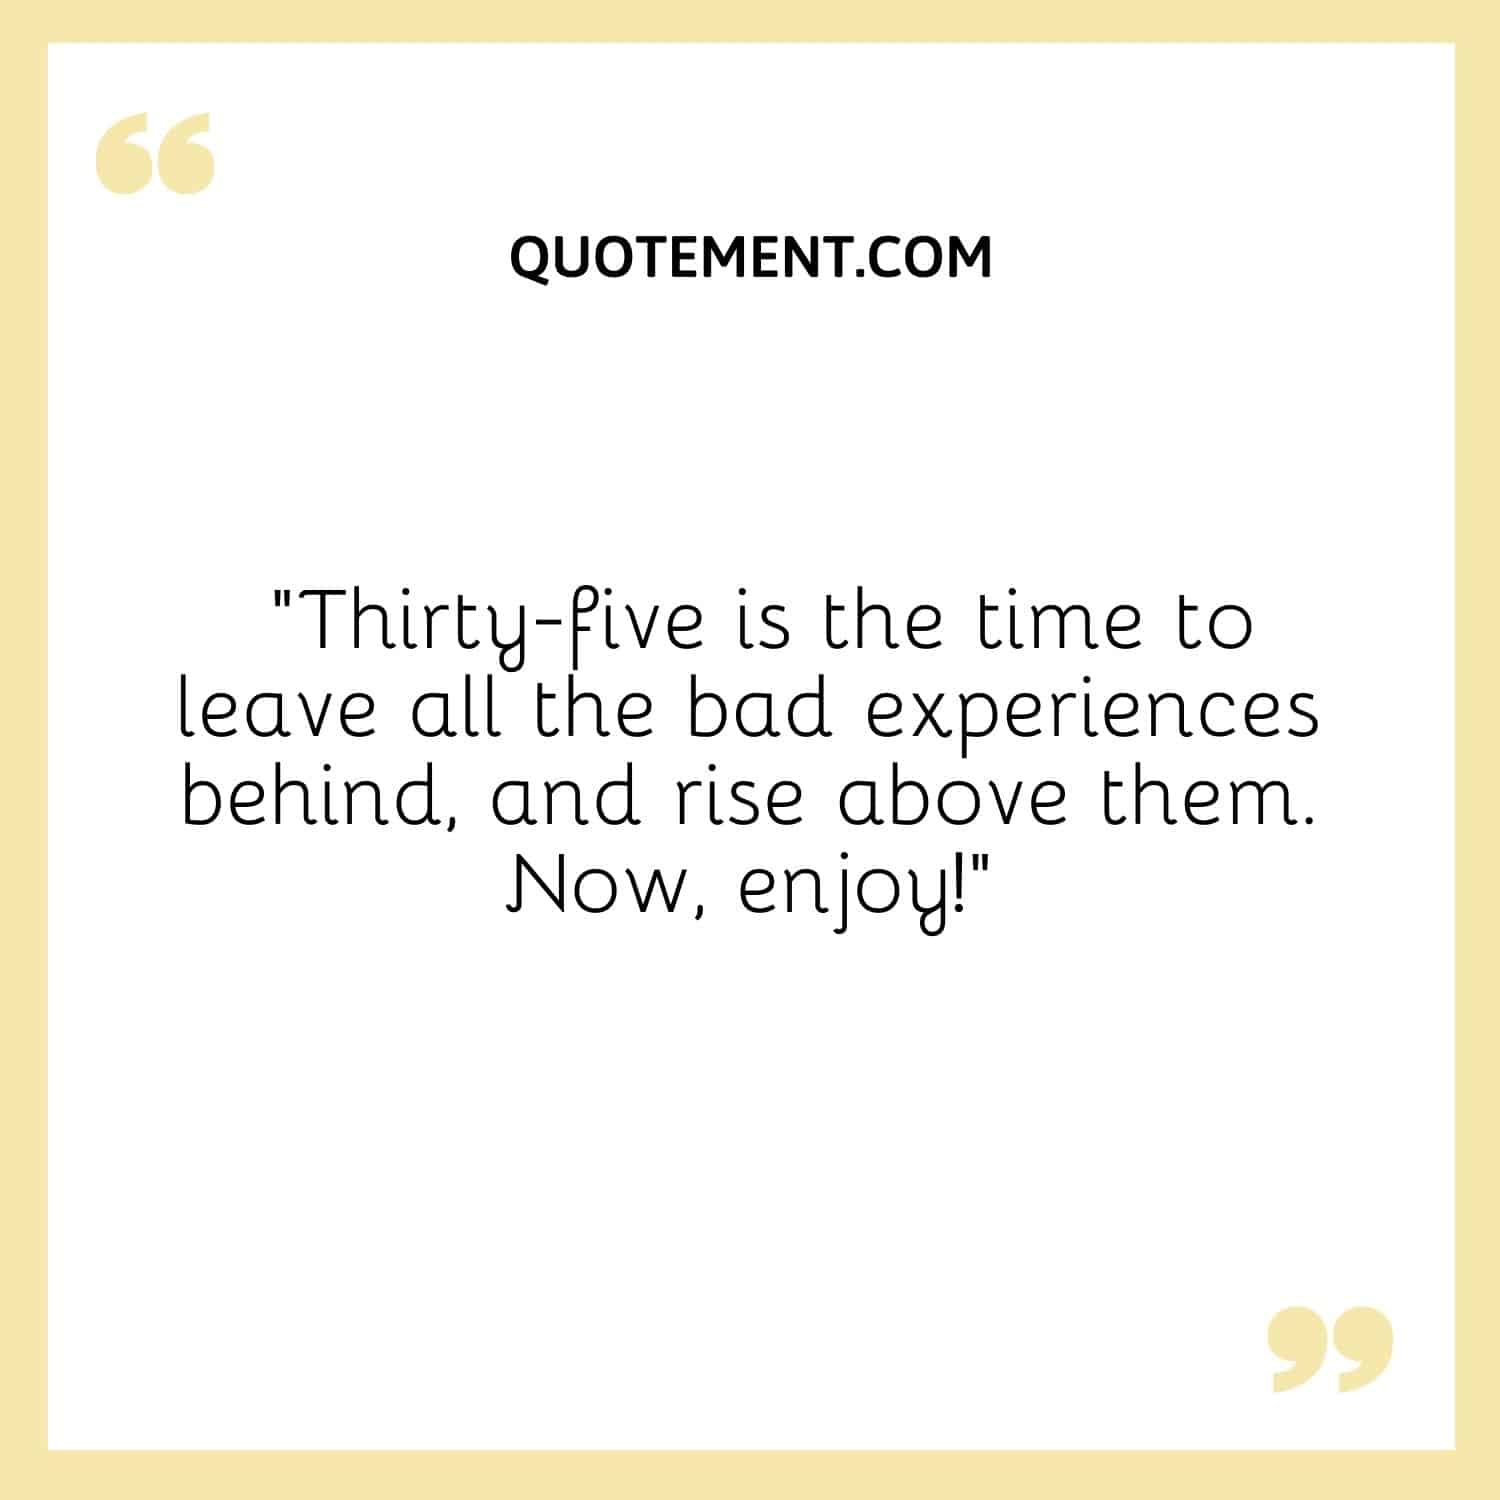 Thirty-five is the time to leave all the bad experiences behind, and rise above them